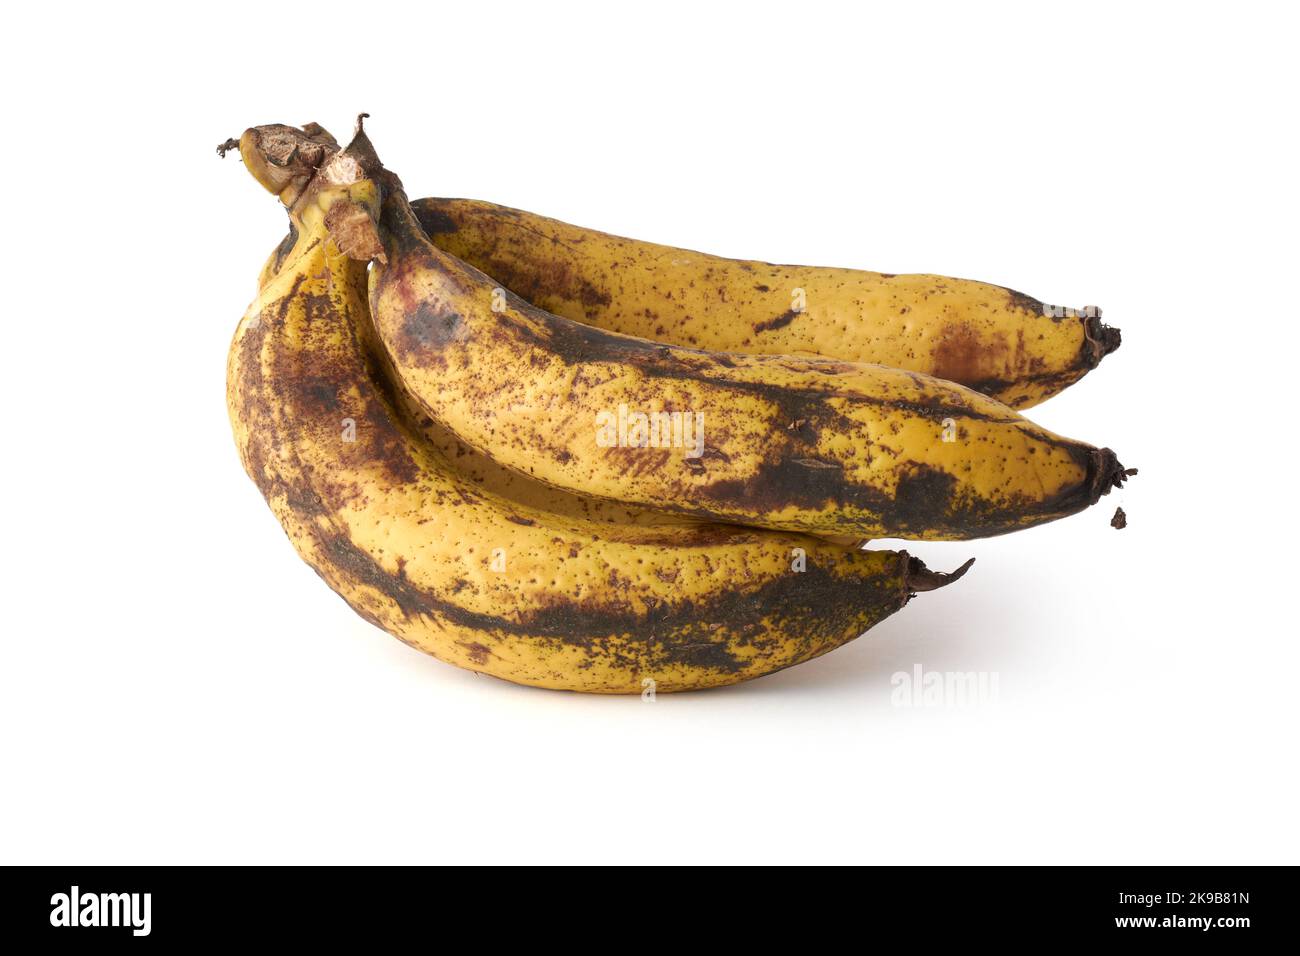 bunch of over ripe black or brown spotted banana, bruises on fruit isolated on white background Stock Photo